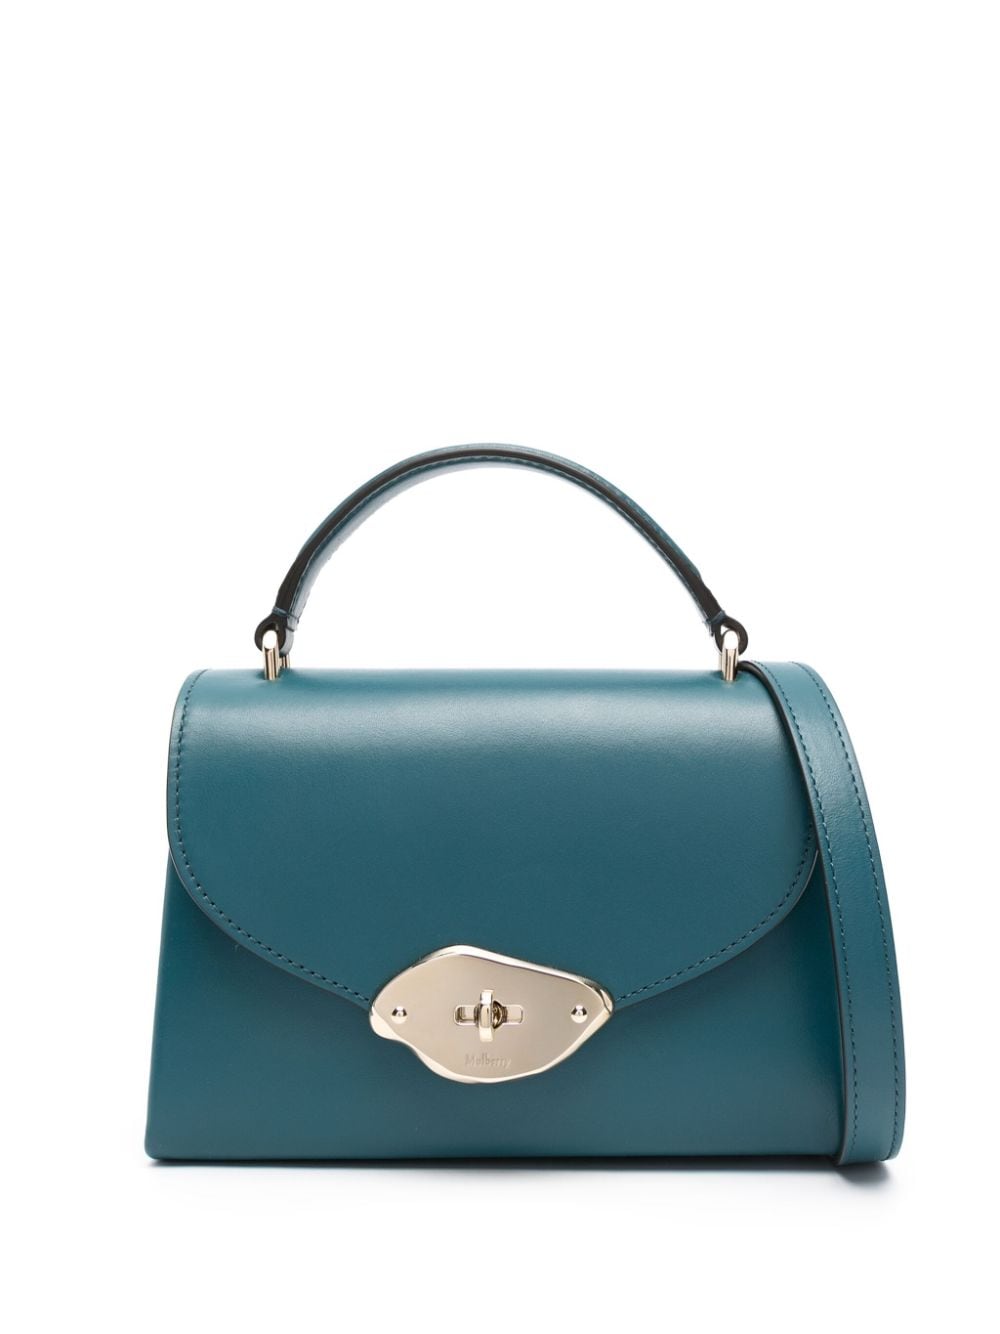 Mulberry Lana leather tote bag - Blue von Mulberry